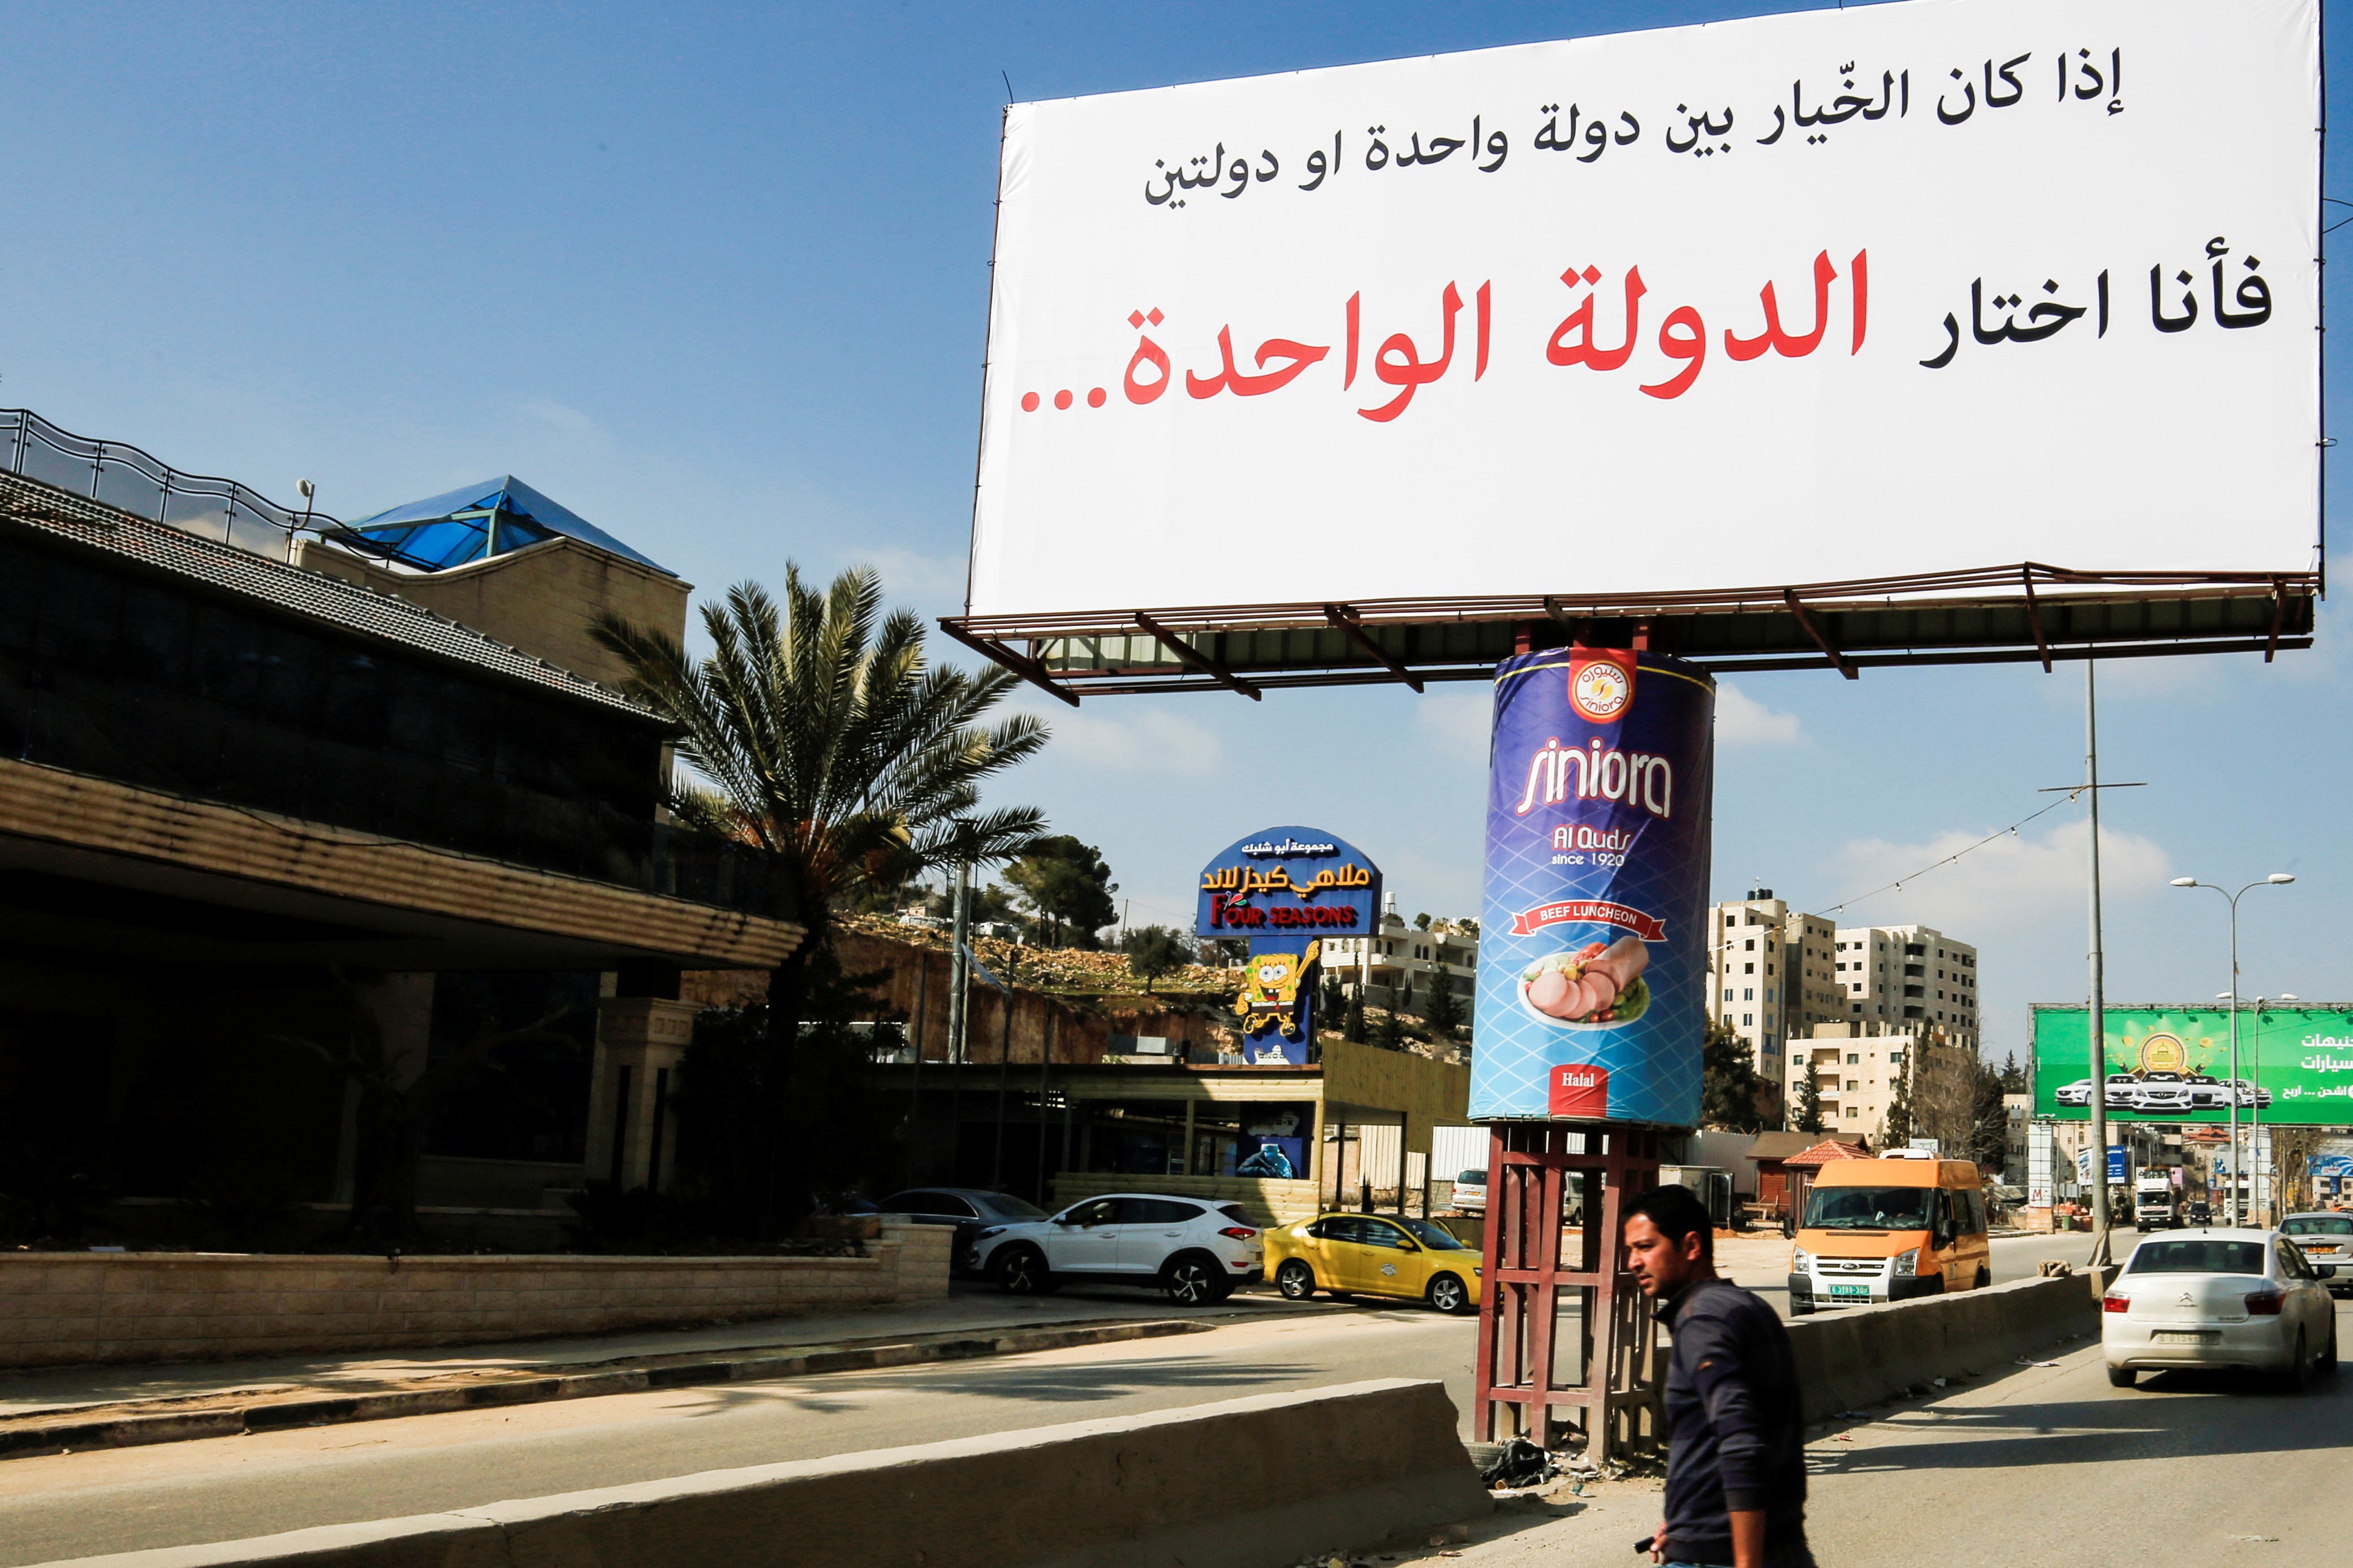 A picture taken on February 23, 2017 shows a billboard, of unknown origin, on a main road leading to the West Bank city of Ramallah, reading in Arabic: "If the choice is between one state or two states, then I am choosing the one state."